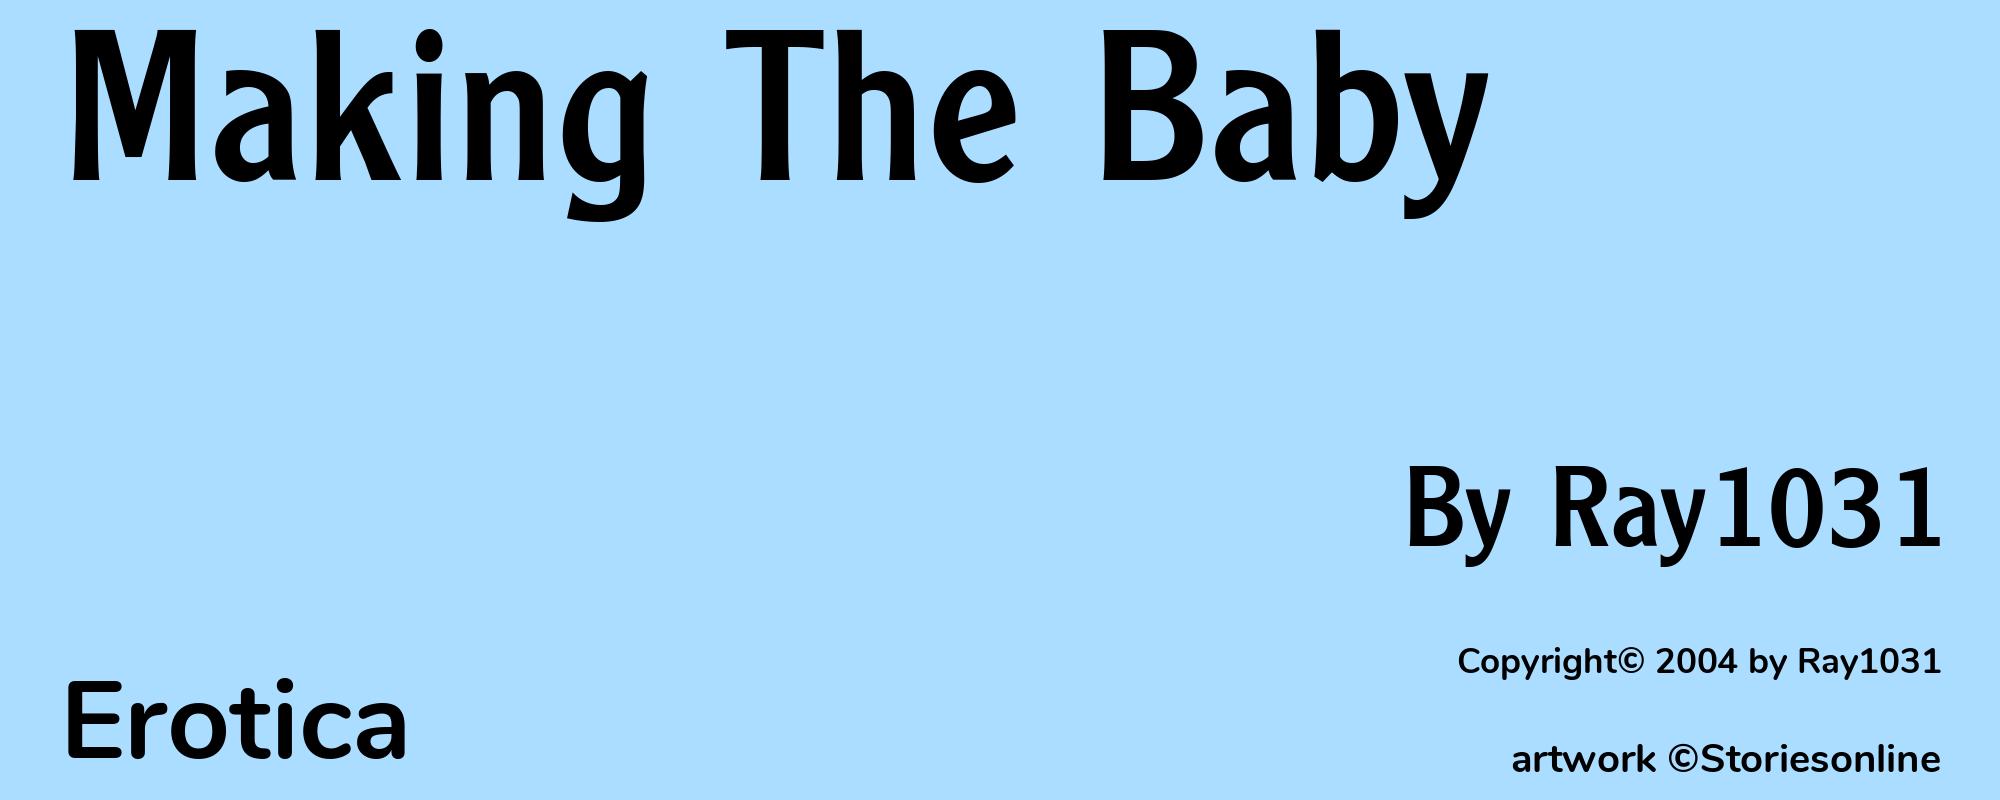 Making The Baby - Cover